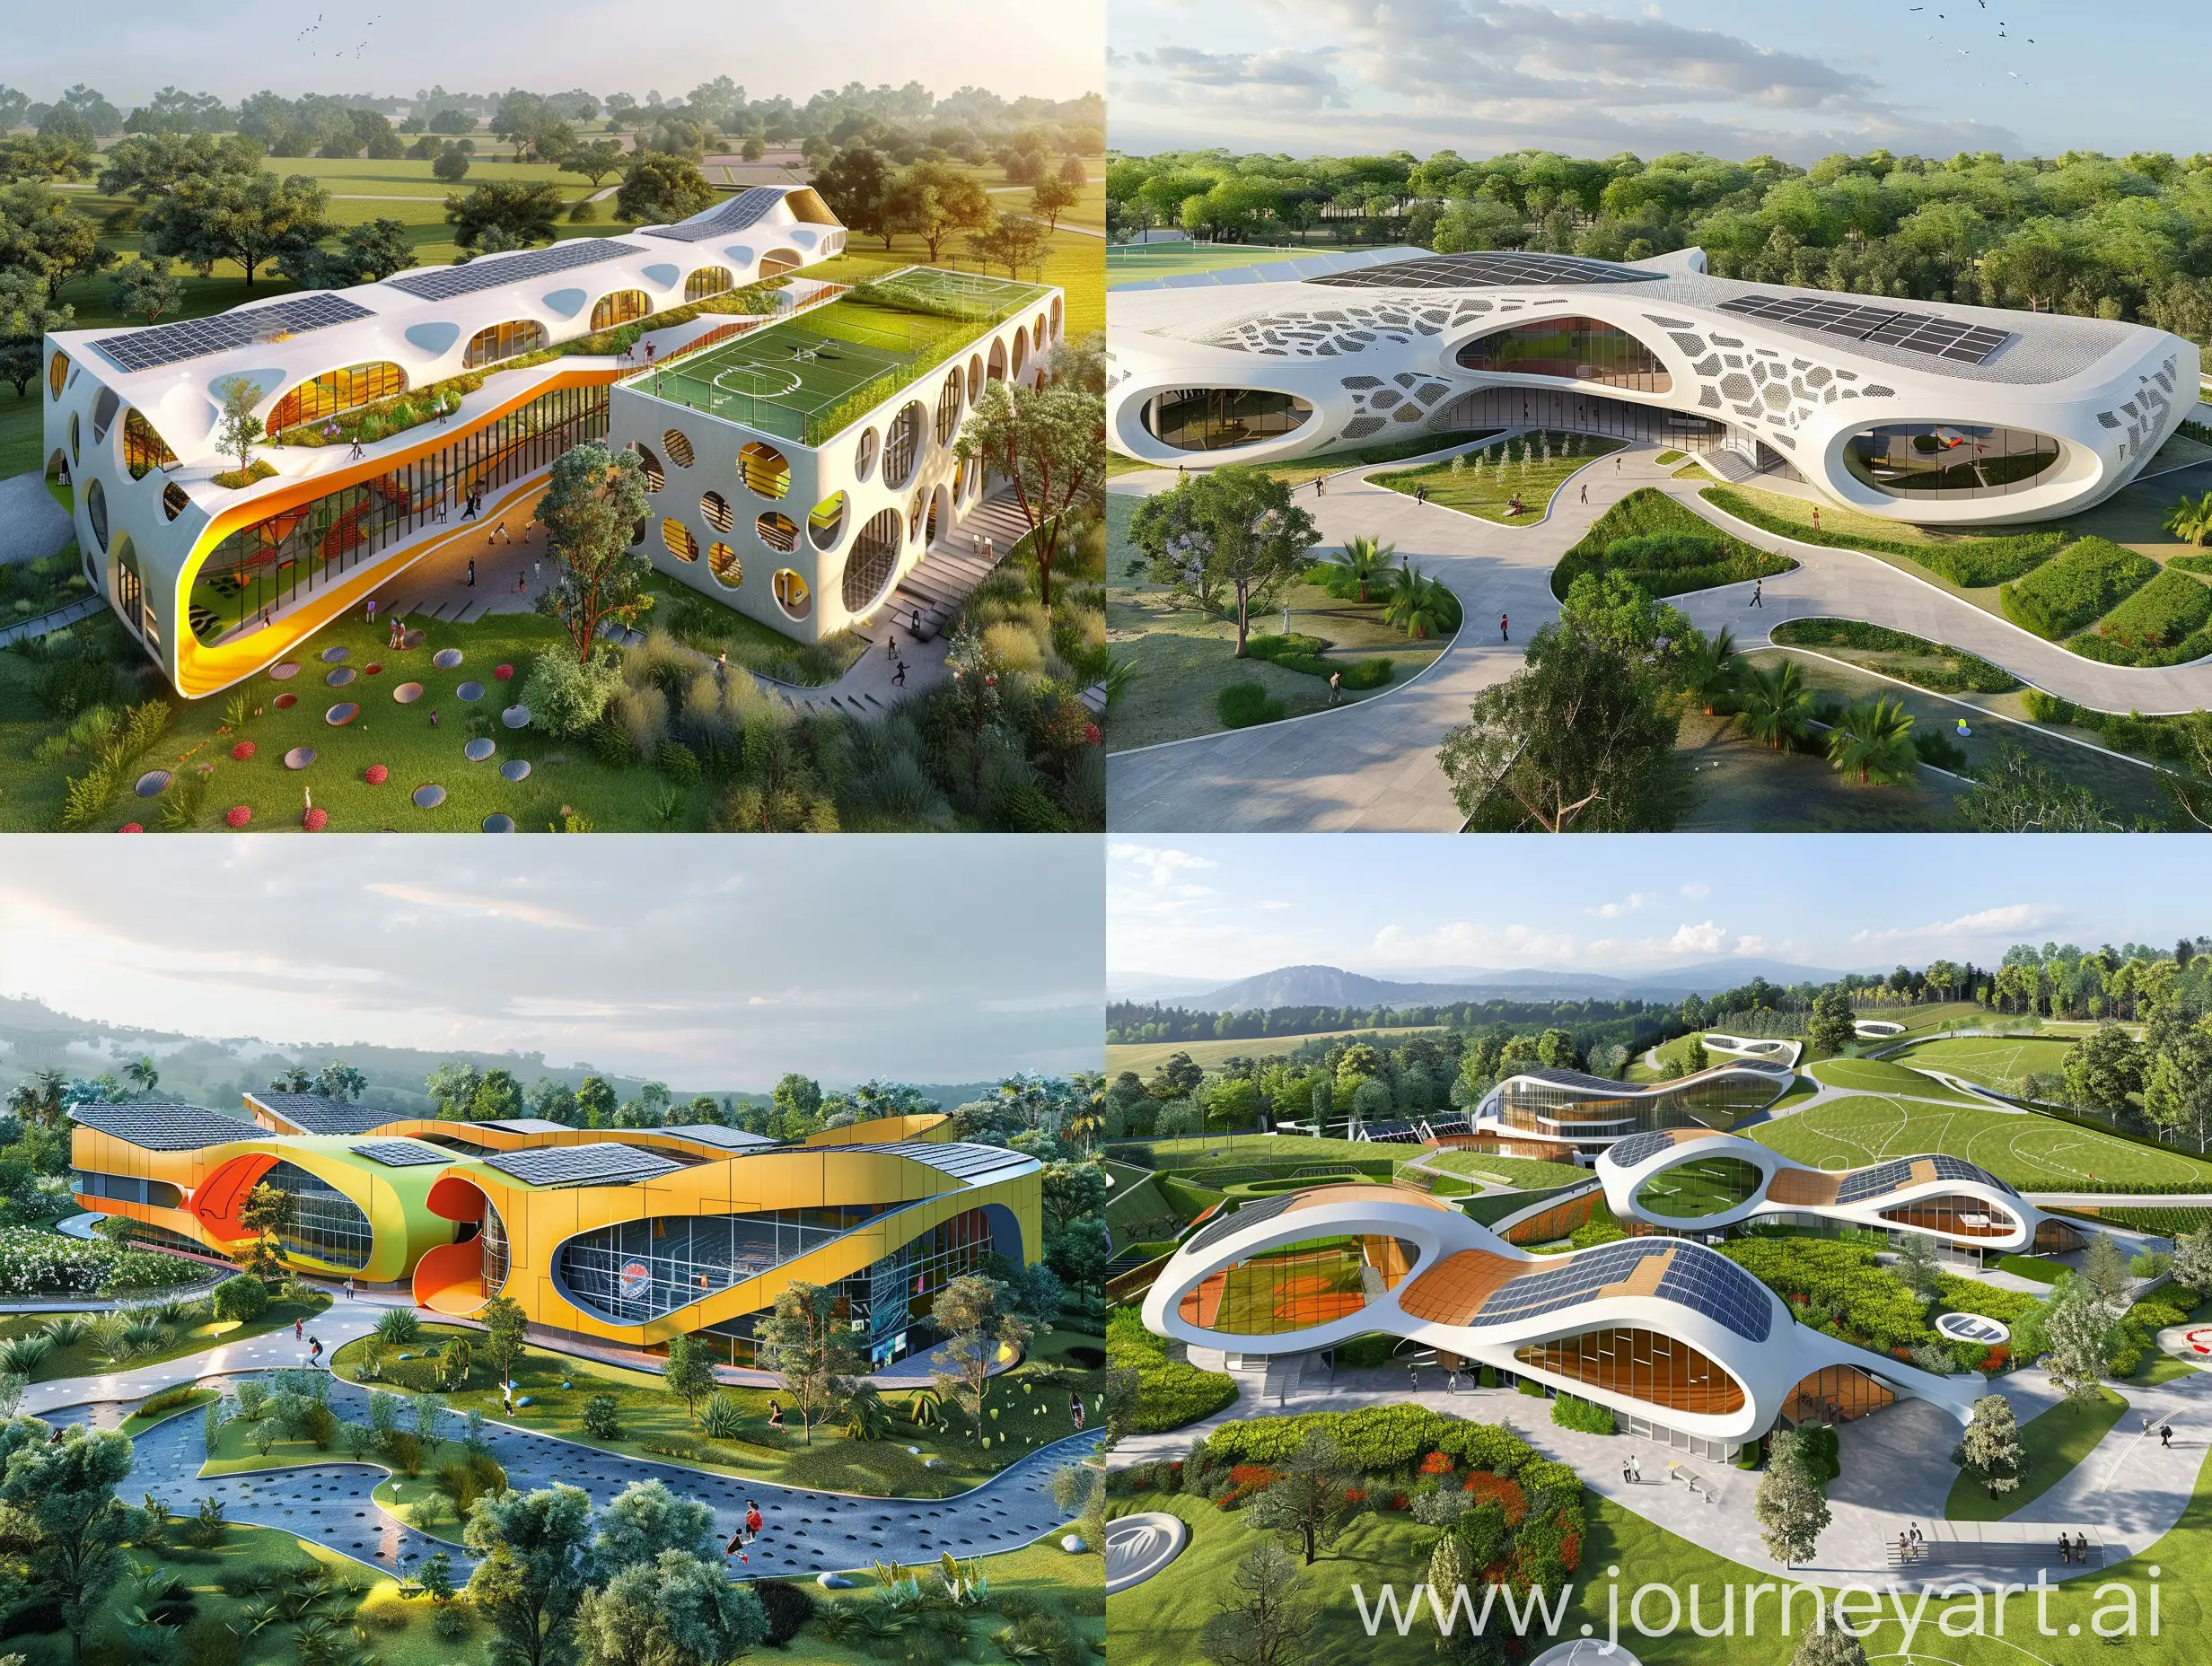 Exterior rendering of a contemporary multifunctional school sports complex that embodies the principles of contextual responsiveness, sustainability, innovation, and human-centric design, a vibrant and dynamic space, seamless integration of indoor and outdoor, lightweight biomorphic forms and patterns, roof solar panels, natural landscape